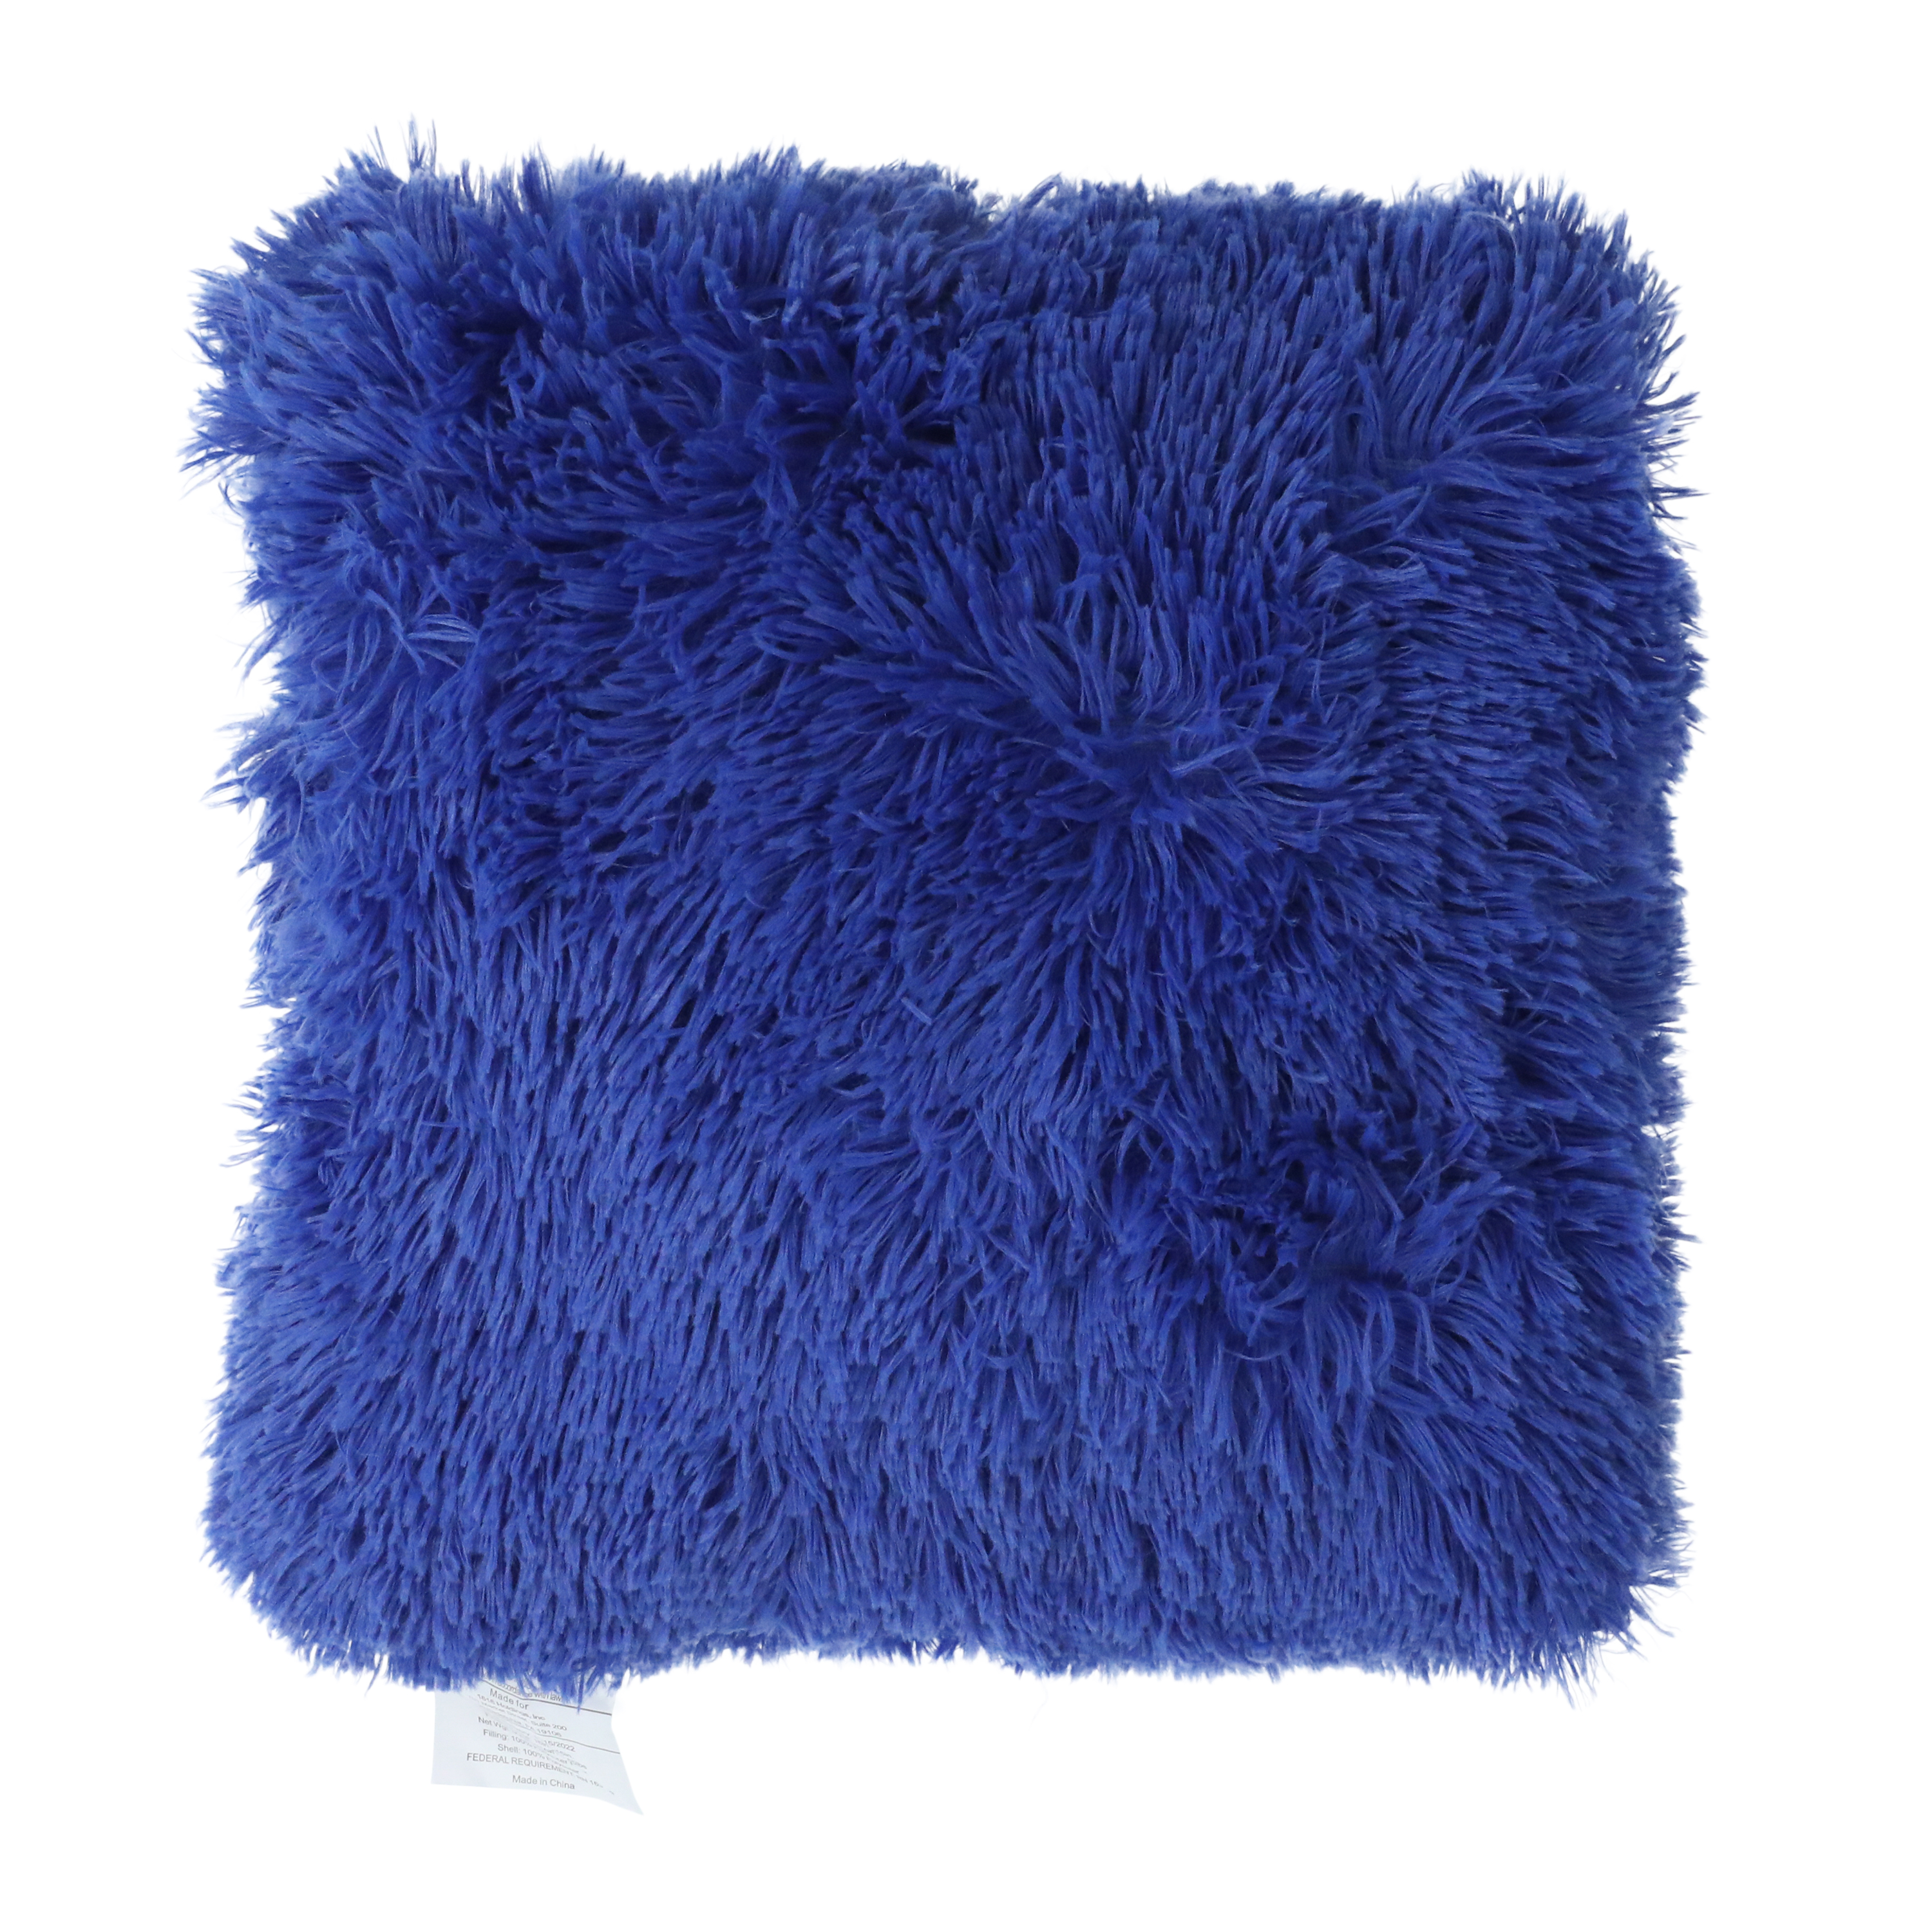 high pile faux fur pillow 16in